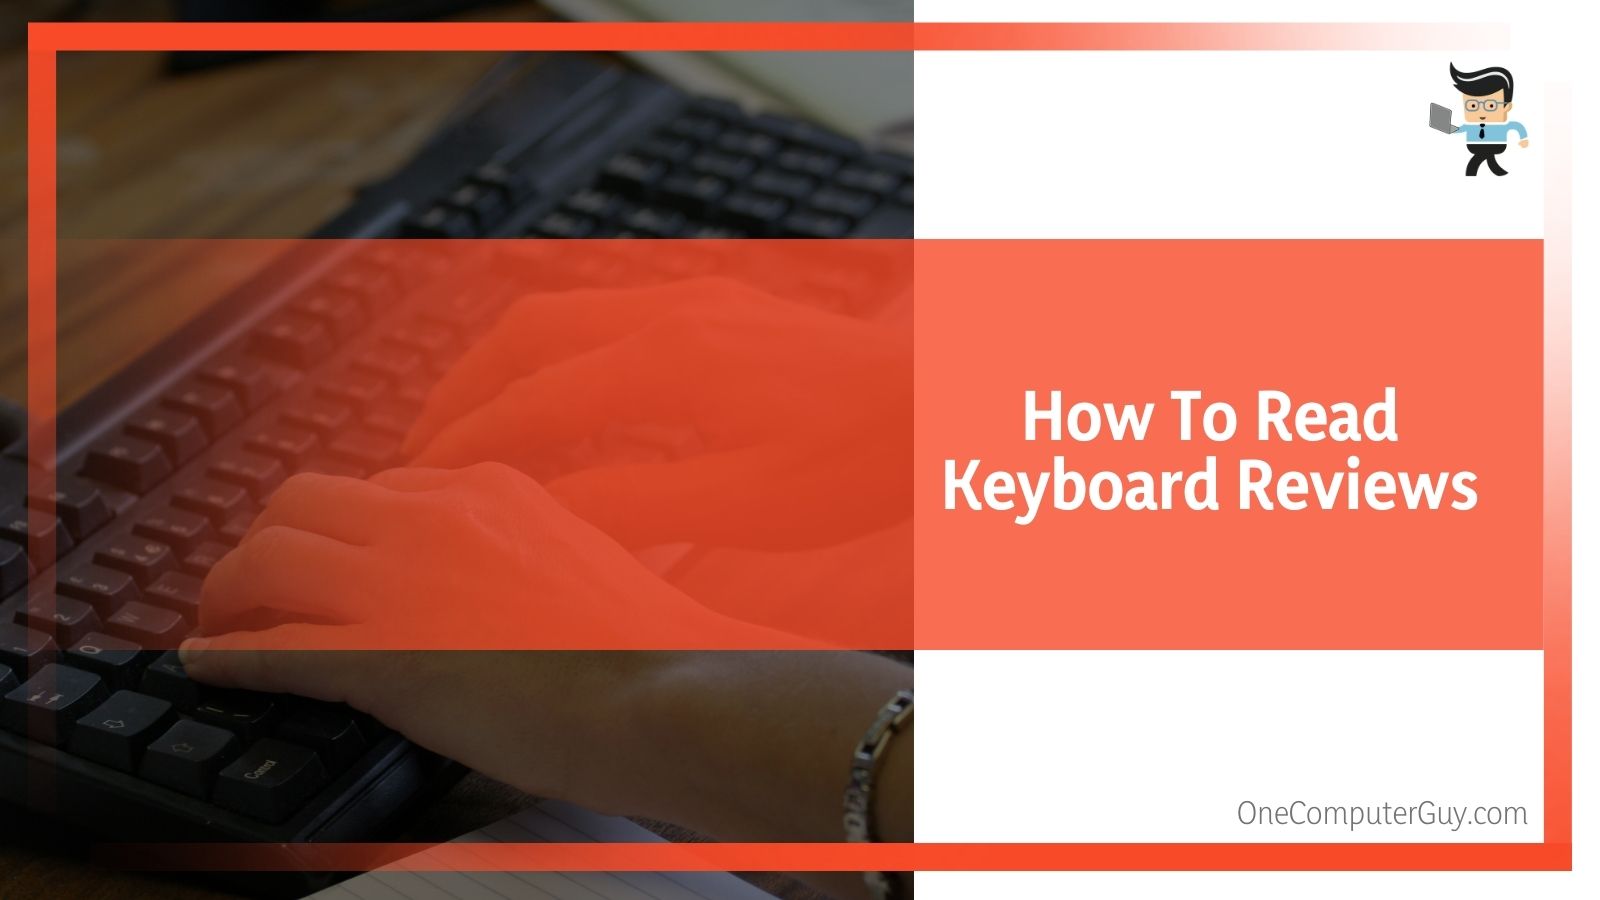 How To Read Keyboard Reviews